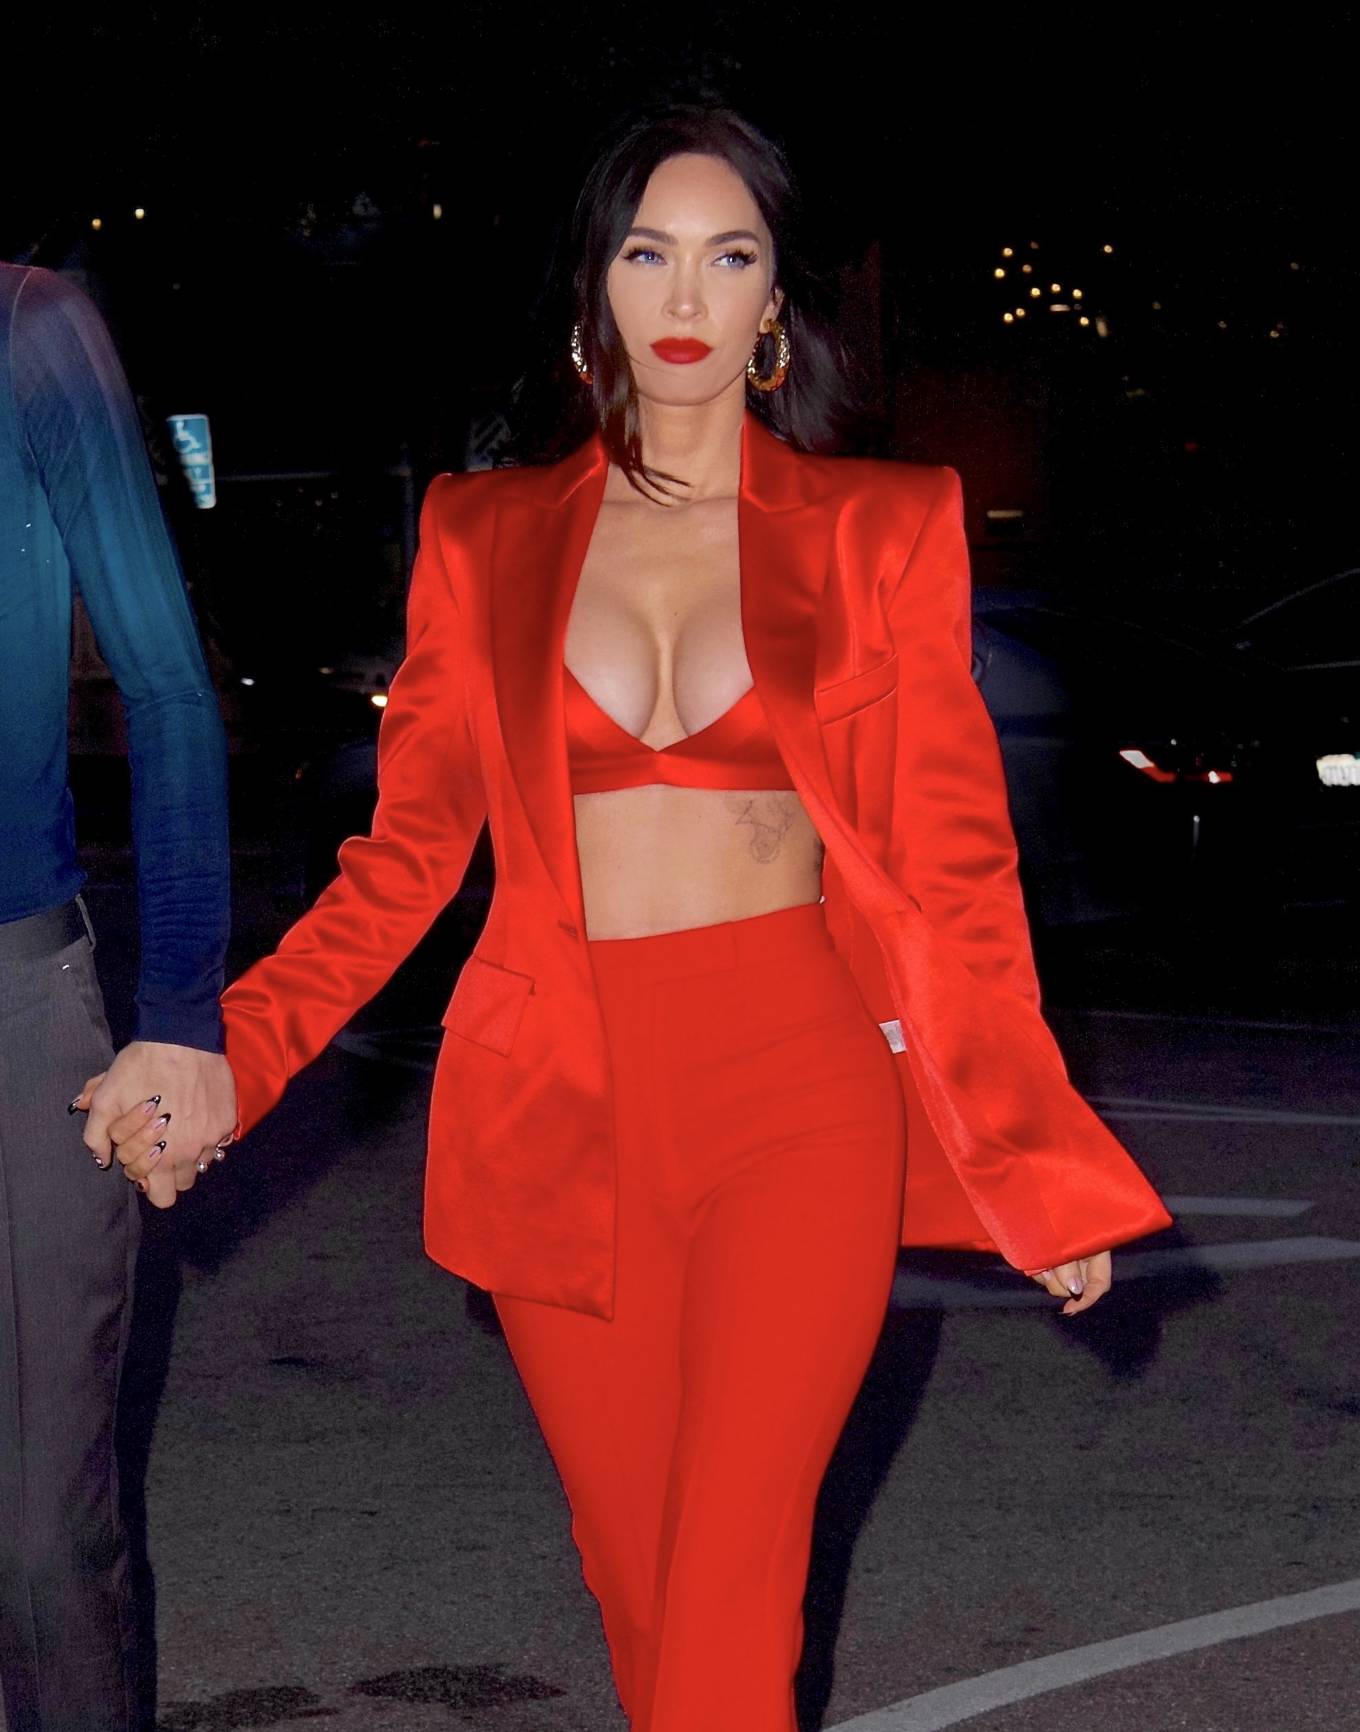 Megan Fox - In red satin suit and platform heels in out Santa Monica